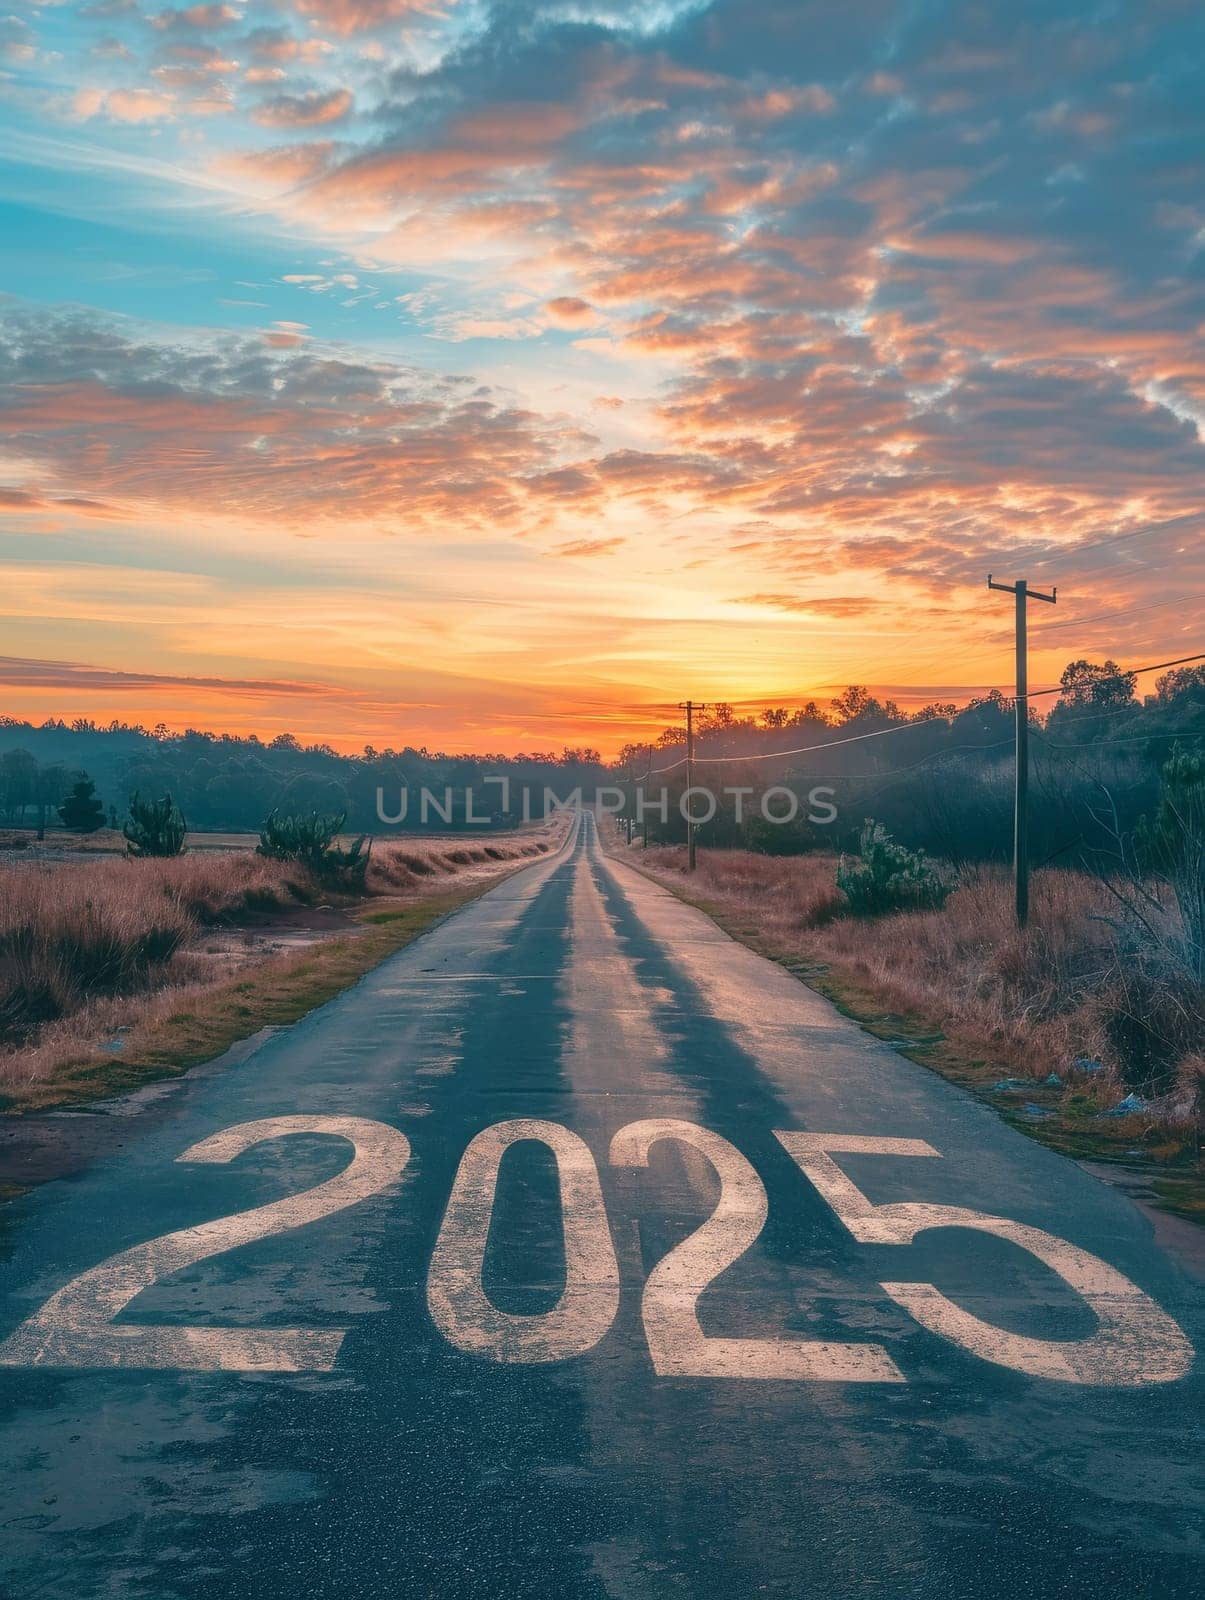 A crisp sunrise road boldly displays '2025', as if guiding travelers toward the promise of the coming year. The dawn sky flares with colors of hope and new possibilities. by sfinks